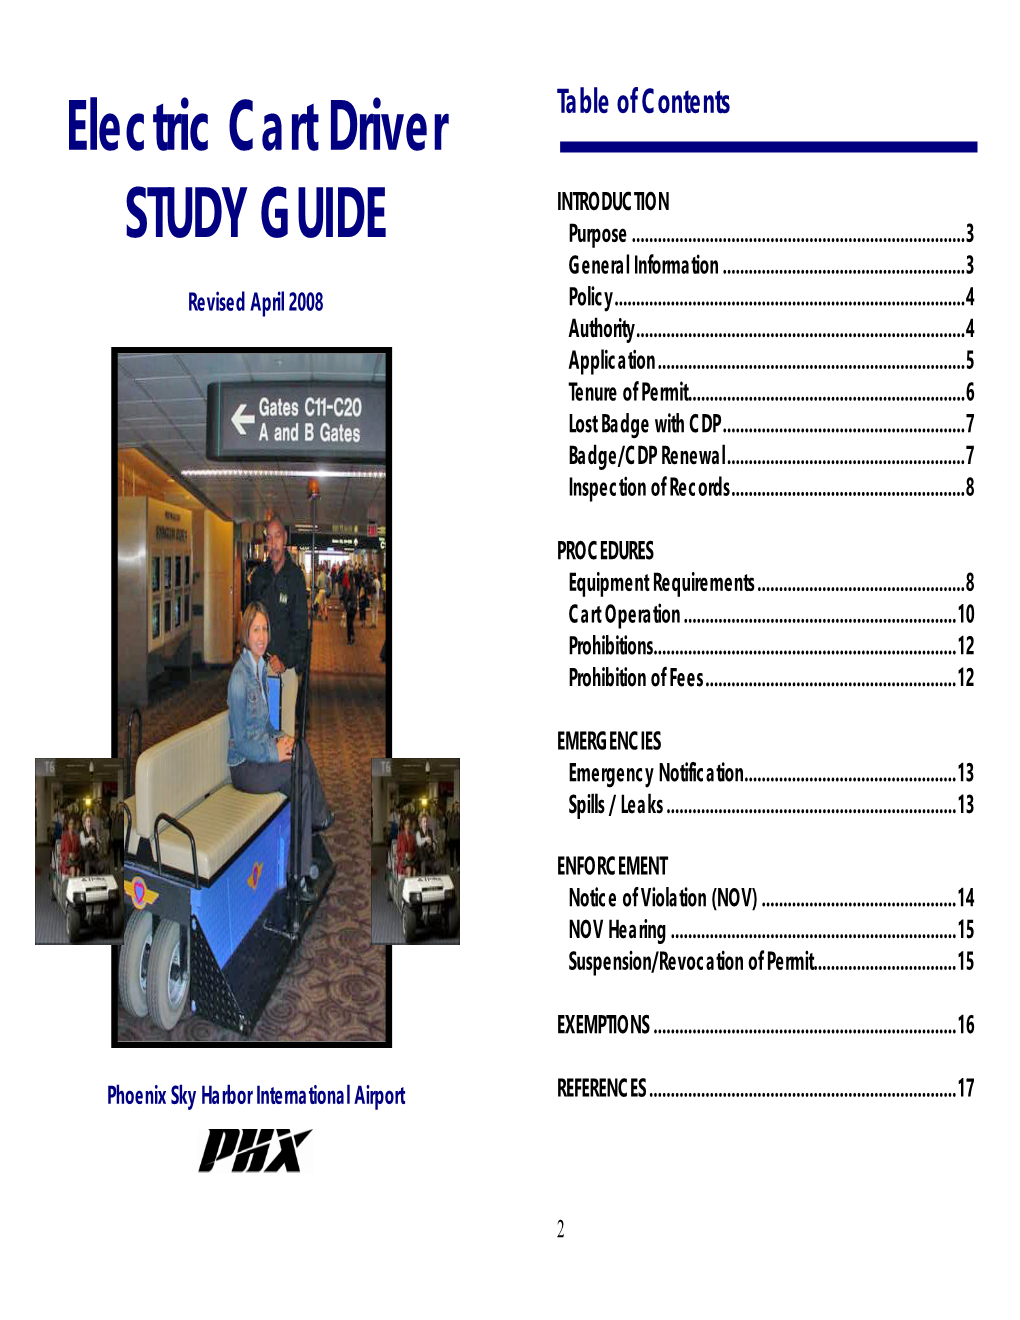 Electric Cart Study Guide